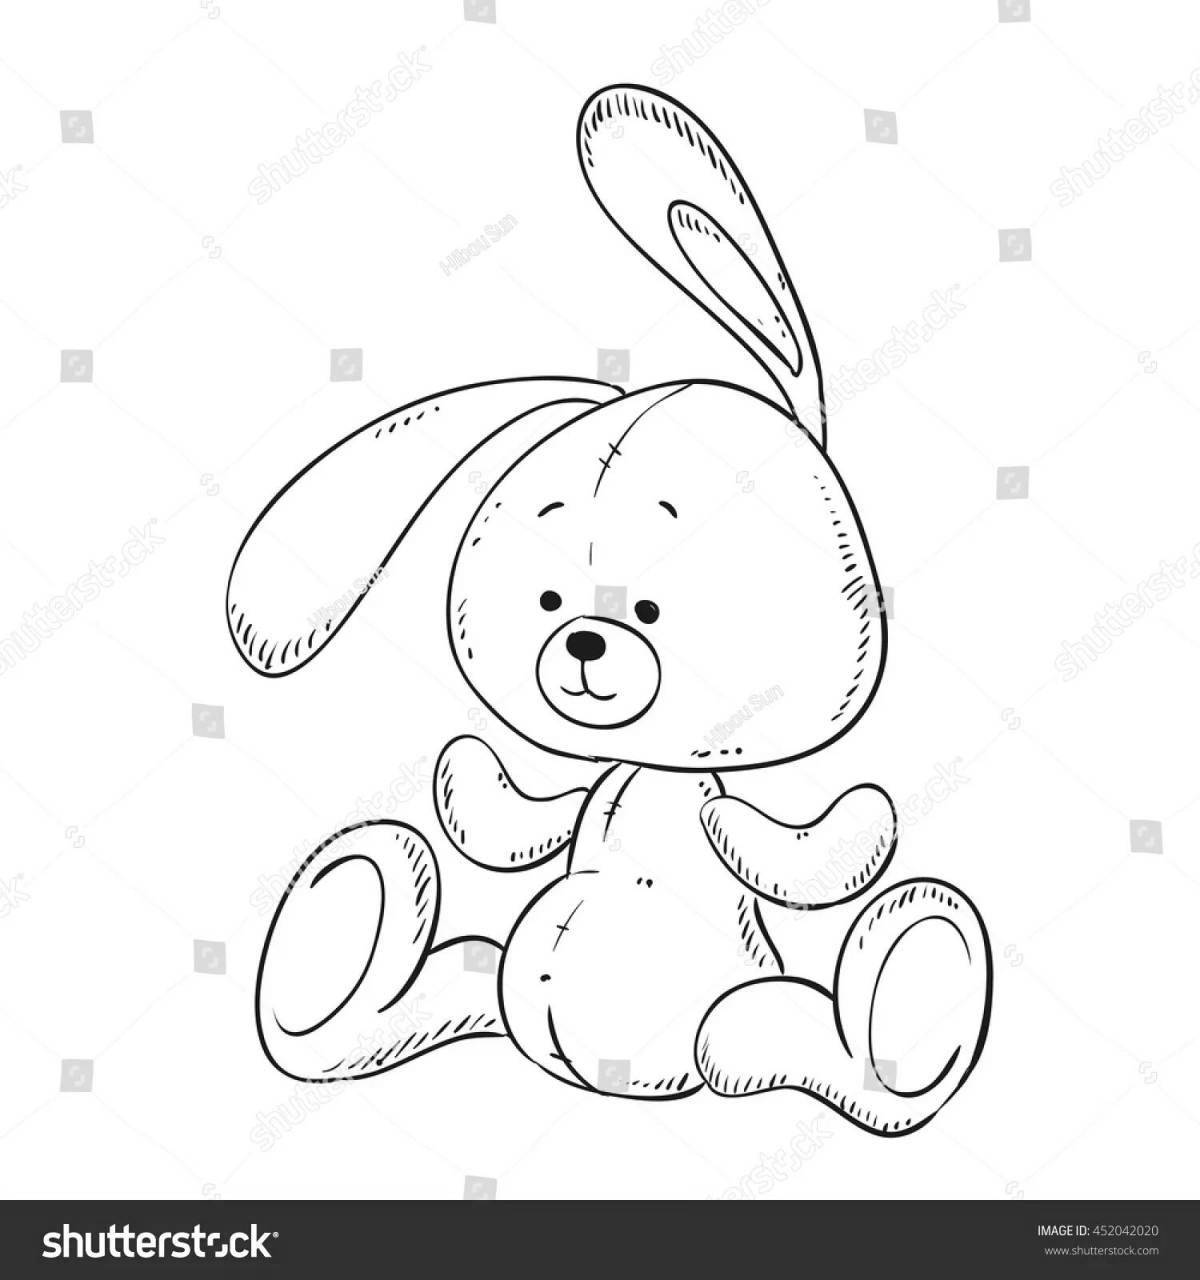 Coloring book colorful rabbit toy